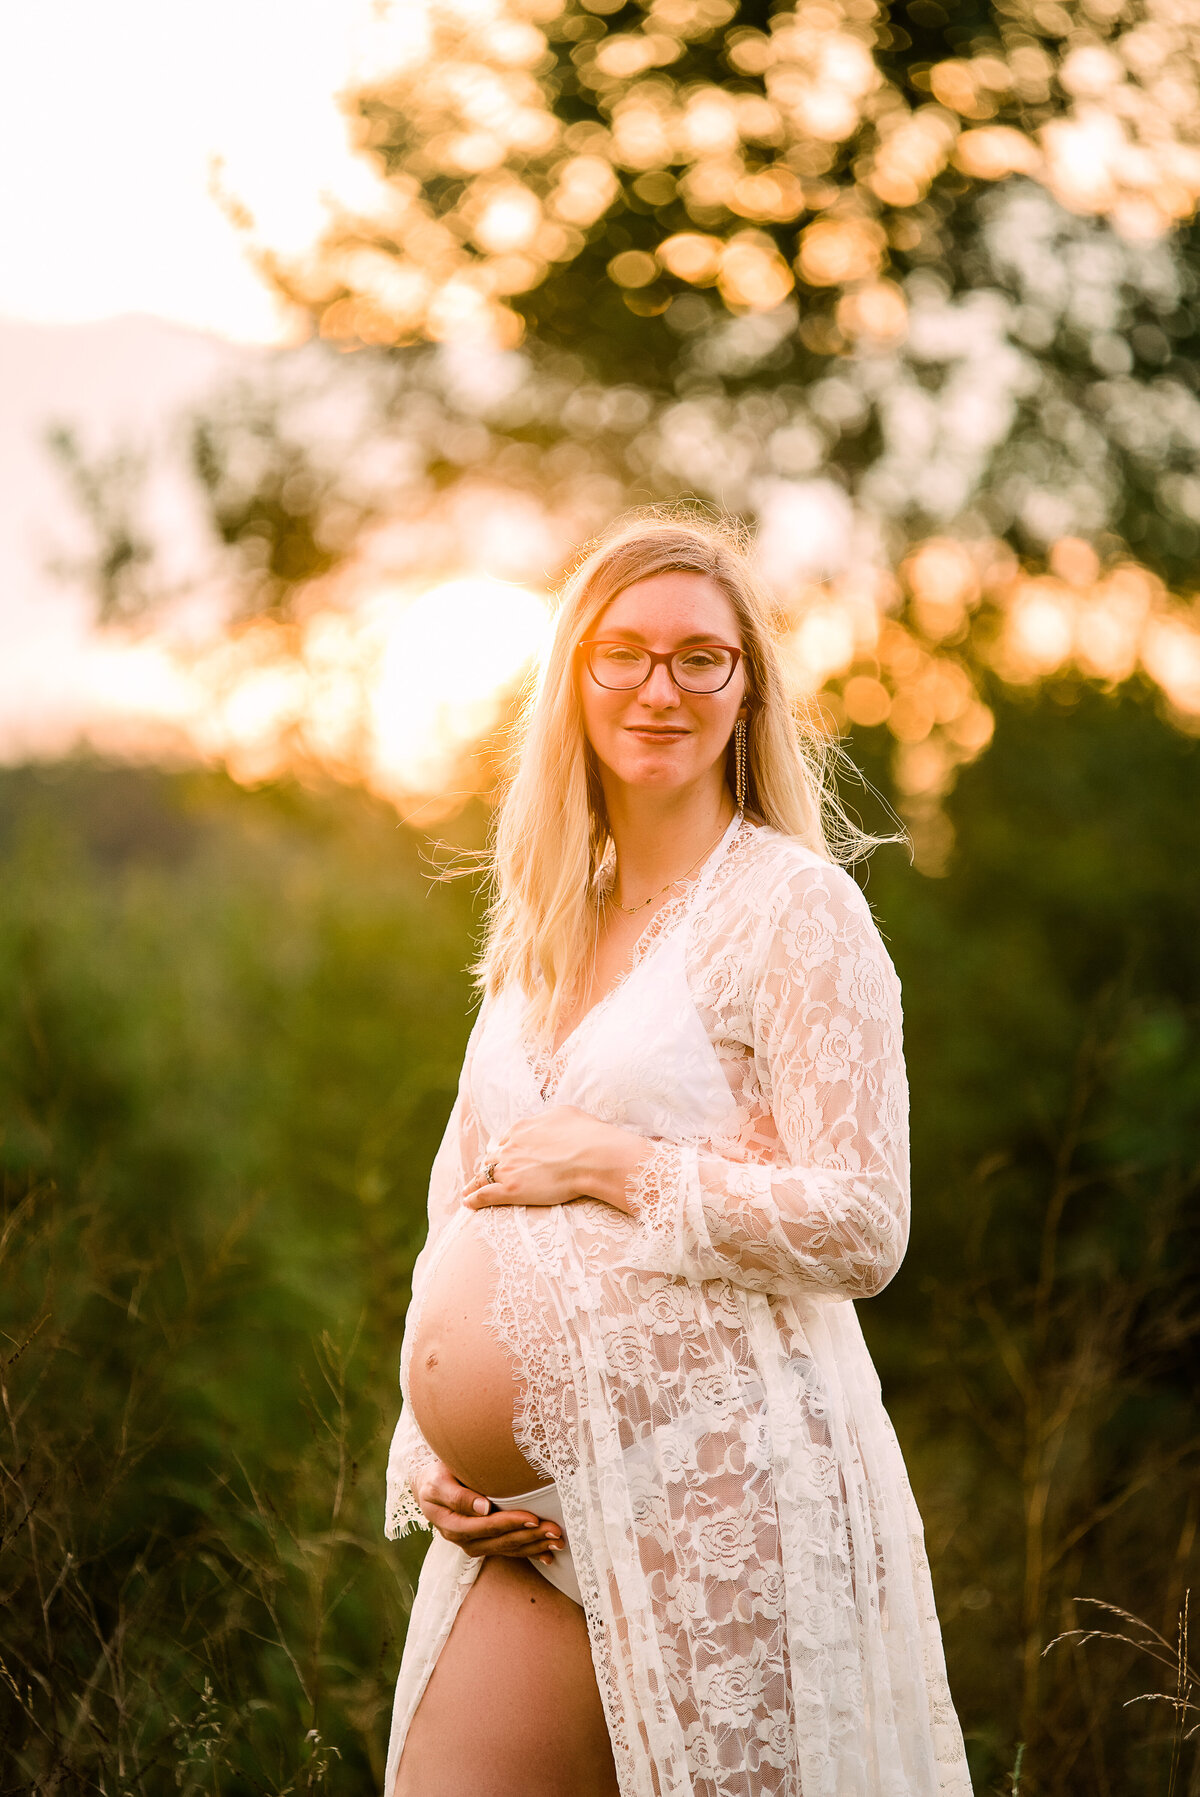 maternity photography in Crawfordsville IN, baby bump photographer, pregnancy photoshoot Crawfordsville IN